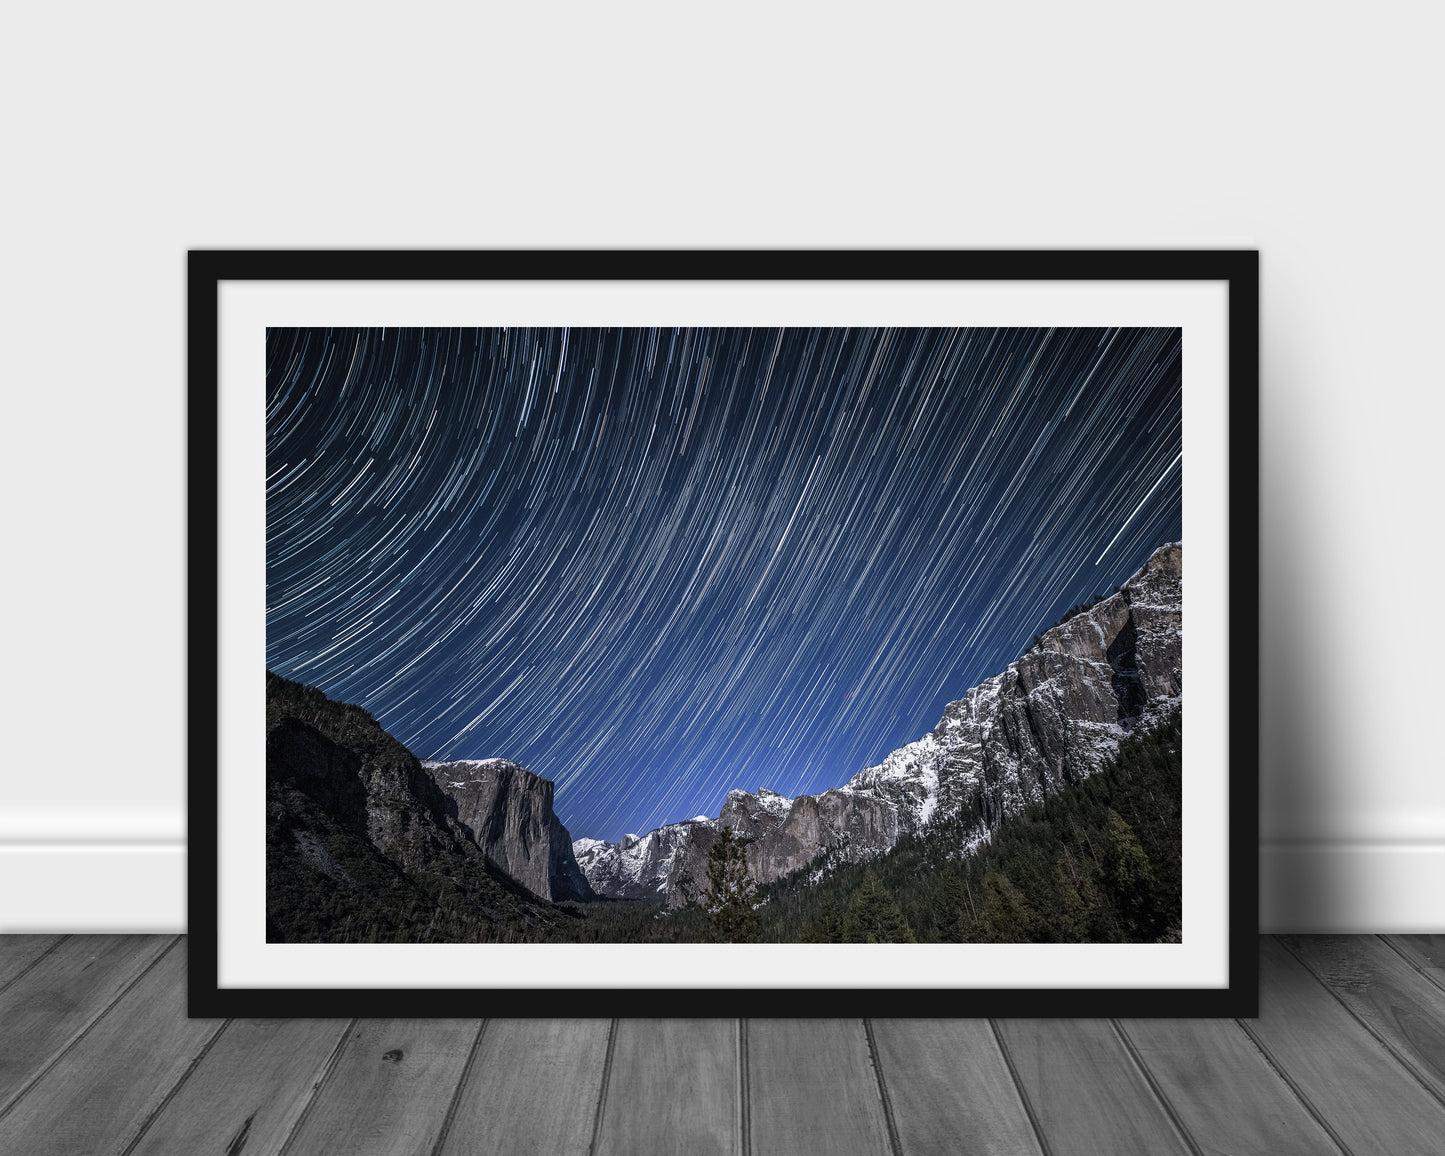 Tunnel View in Yosemite National Park - Star Trails, Night, Milky Way, Nature Photography Prints, Adventure Print, Landscape Wall Art